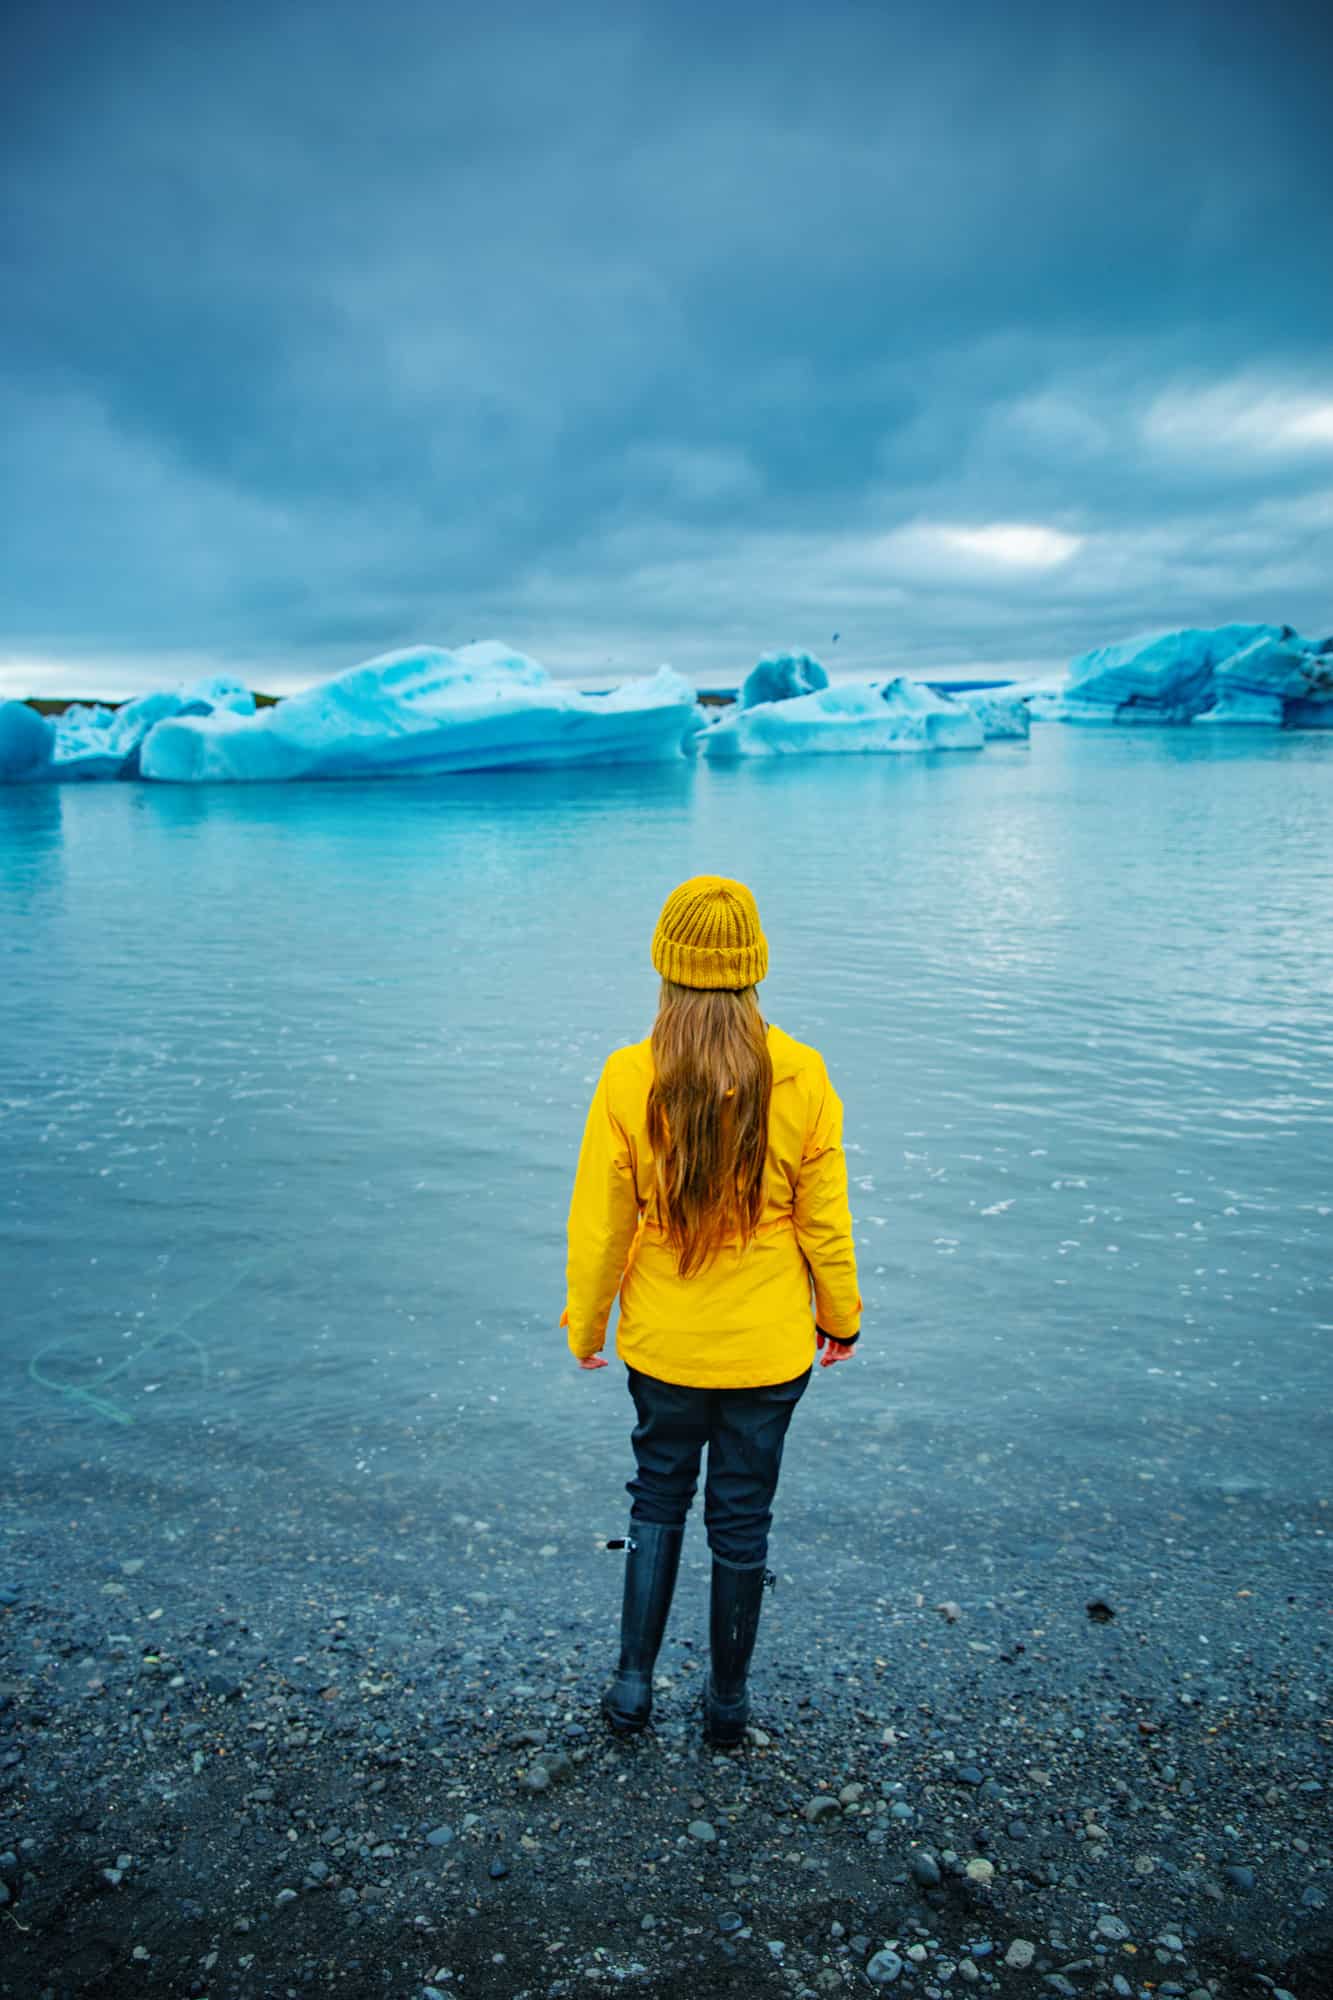 packing travel tips for Iceland when visiting Iceland on a budget | how to pack for iceland on a budget